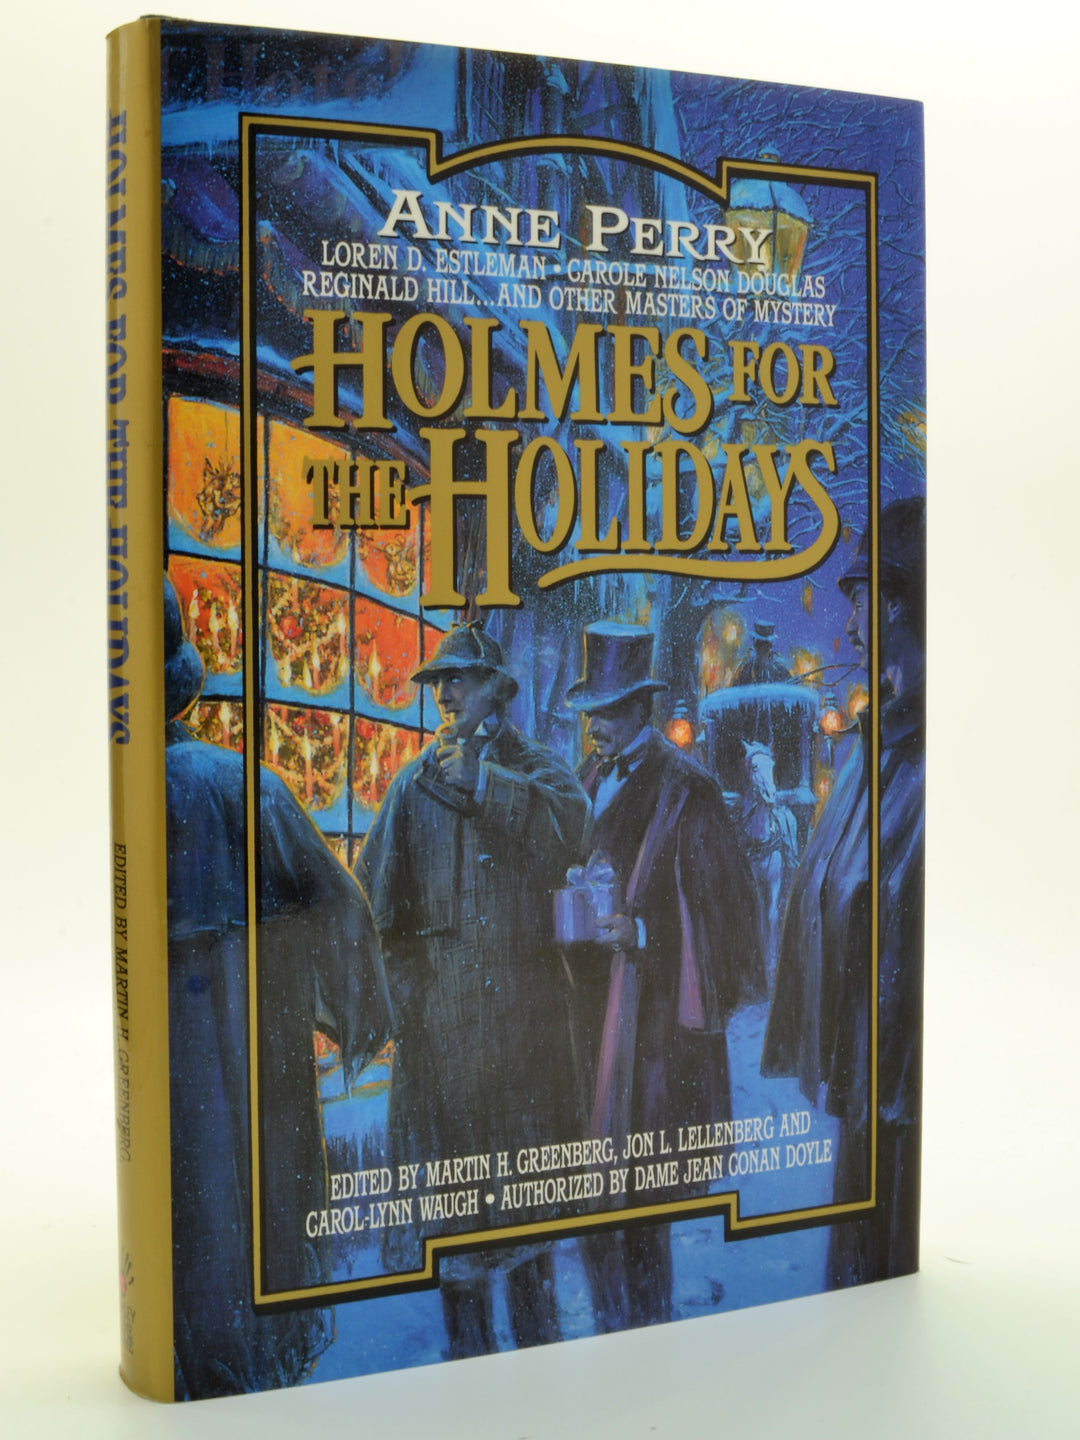 Perry, Anne et al. - Holmes for Holidays | back cover